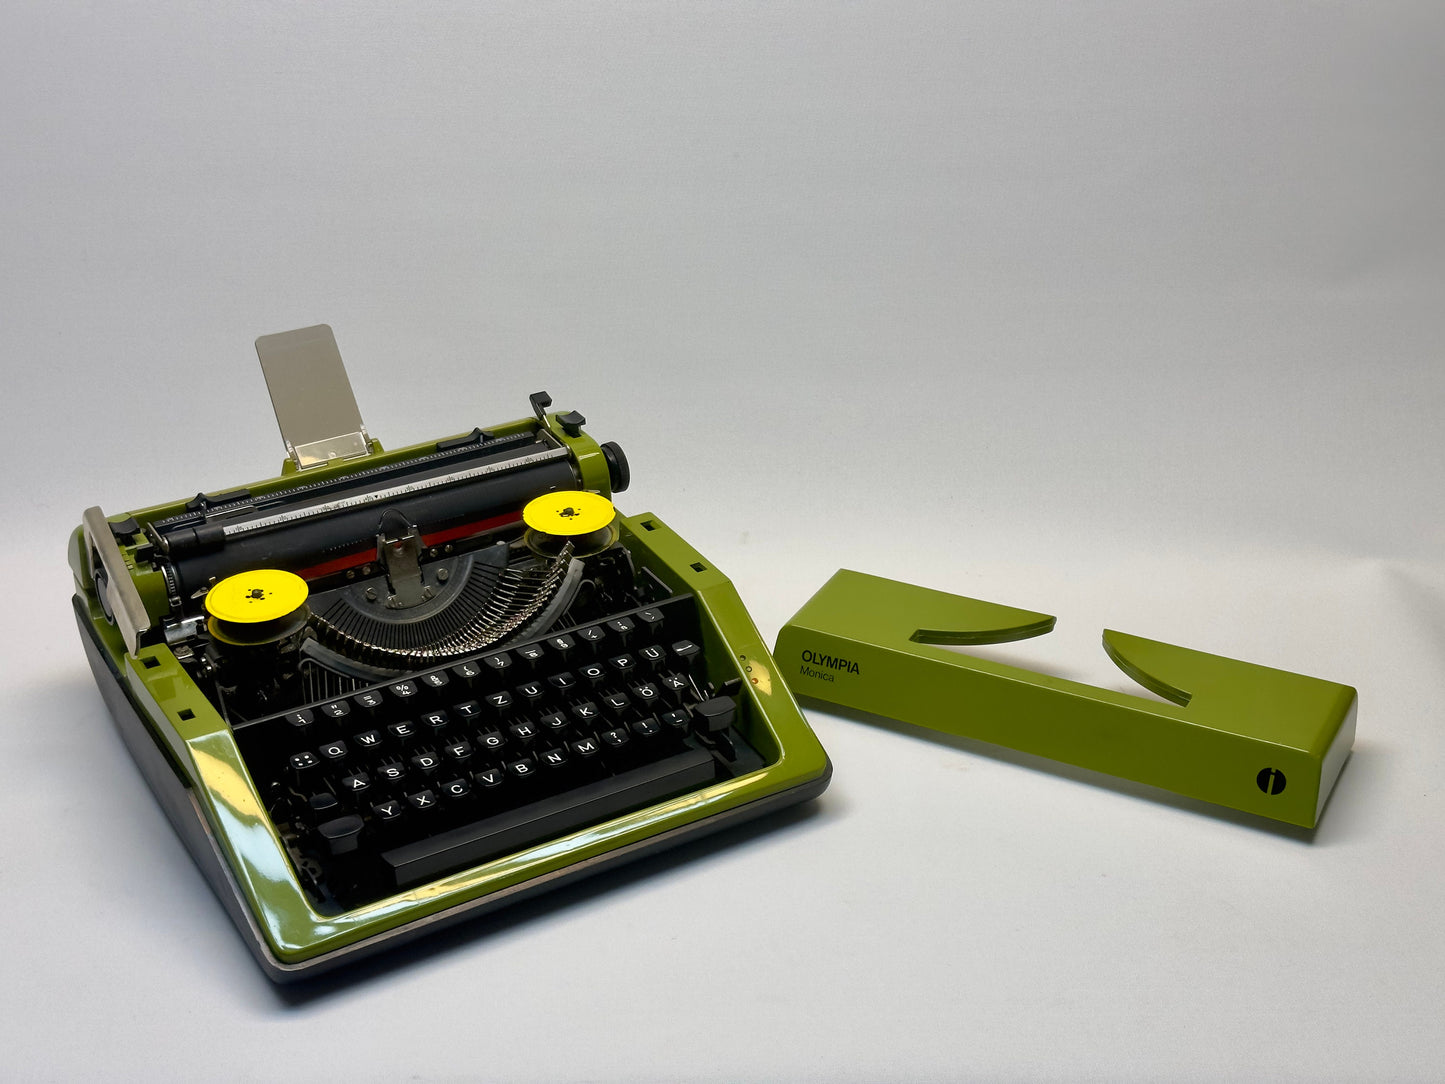 Nice Gift!, Vintage Charm: Olympia Monica Typewriter in Enchanting Green with Black Keyboard and Bag - Fully Restored, Ready to Inspire